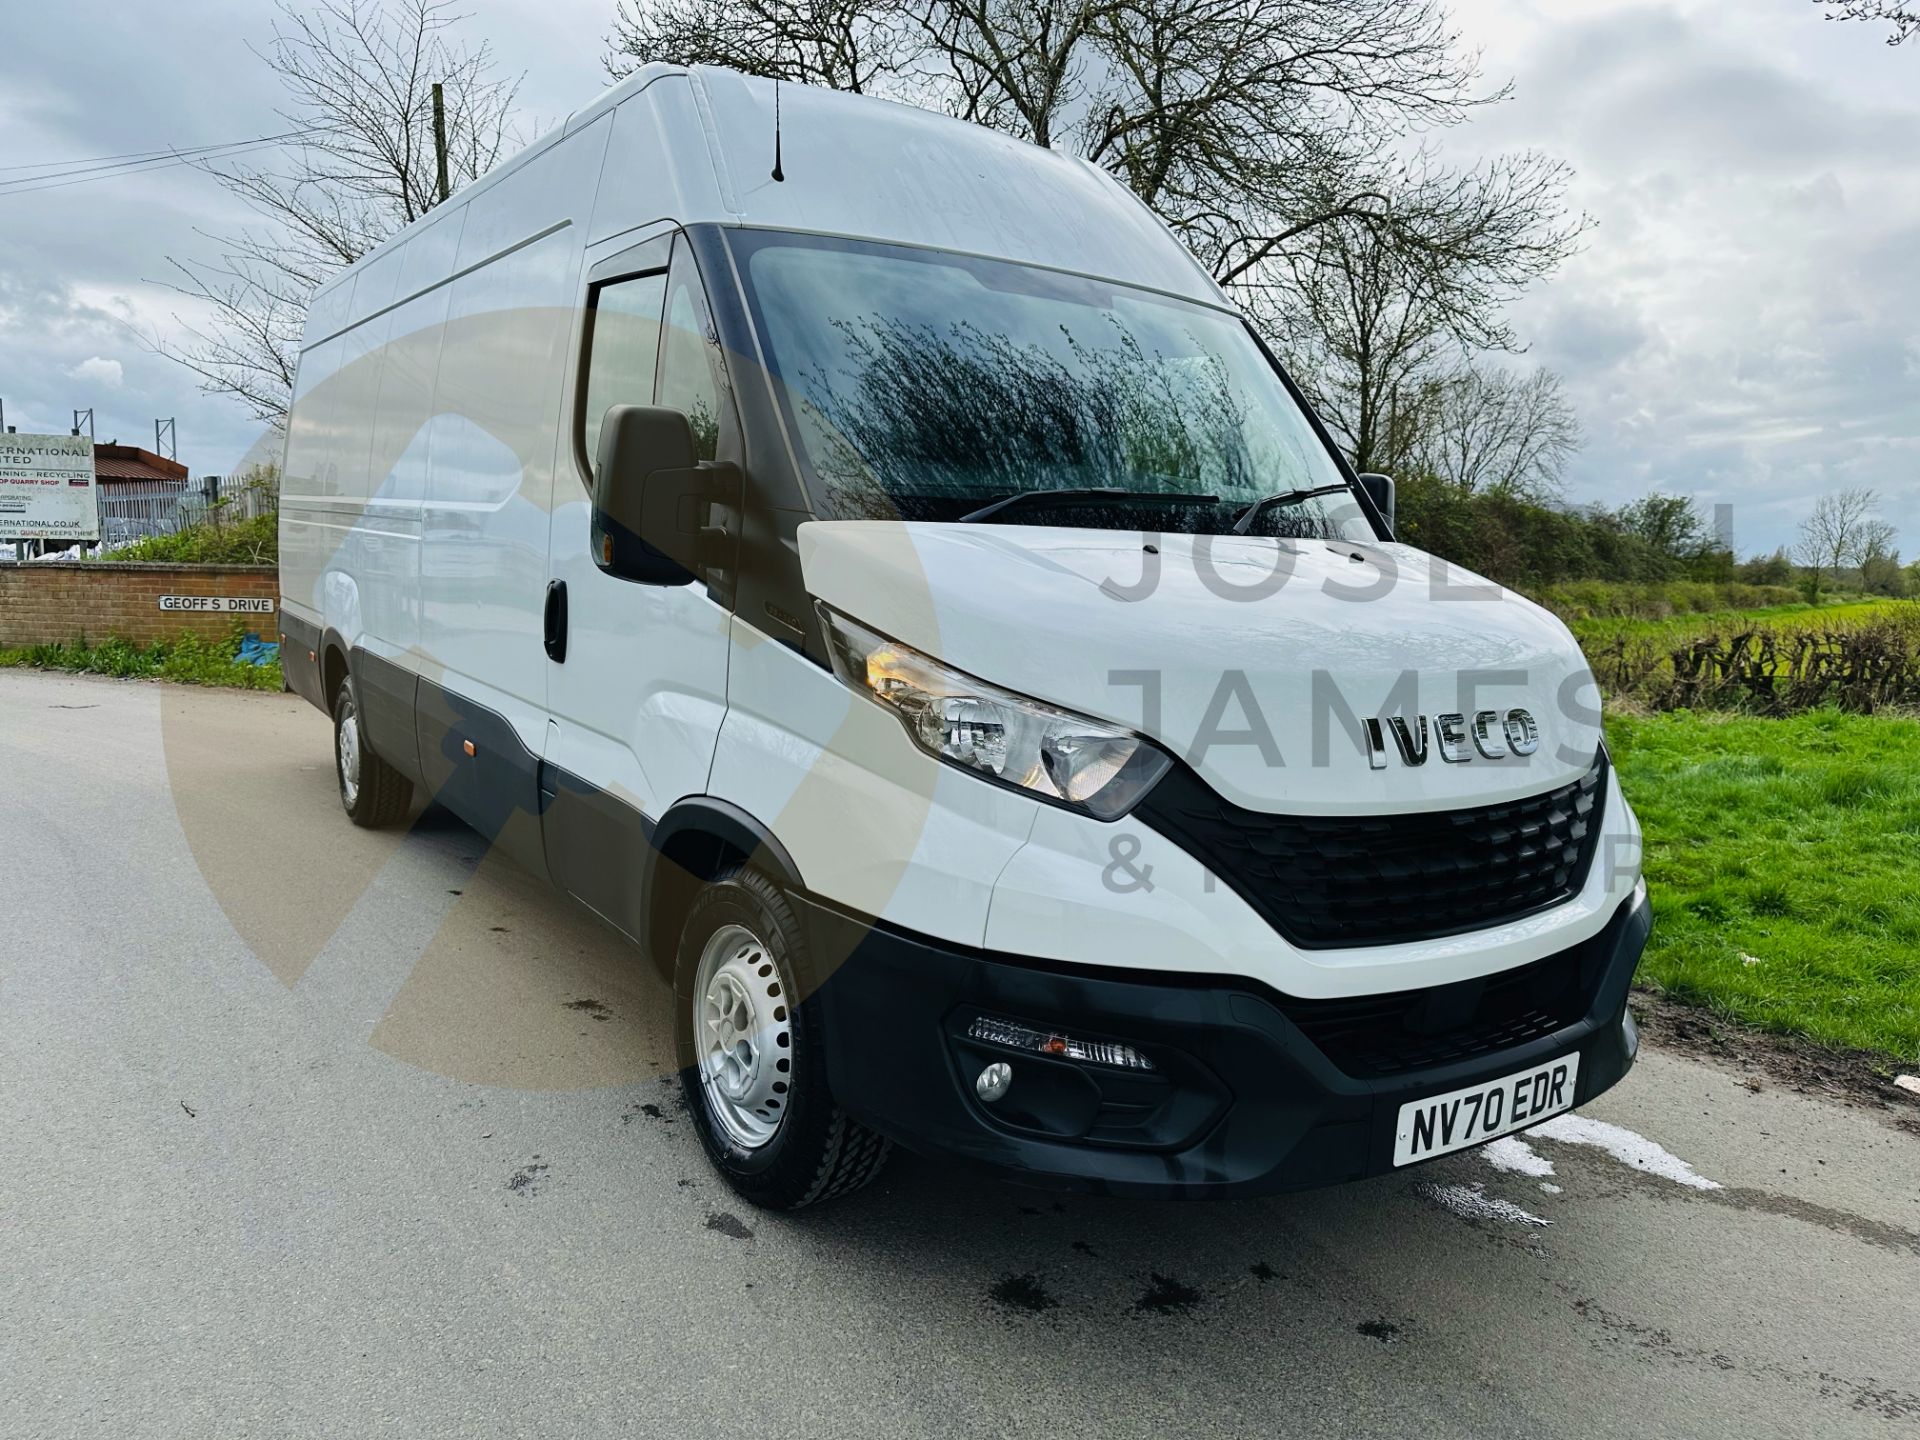 IVECO DAILY 35-140 LONG WHEEL BASE HIFG ROOF - 2021 REG (NEW SHAPE) ONLY 85K MILES - AIR CON - LOOK! - Bild 2 aus 30